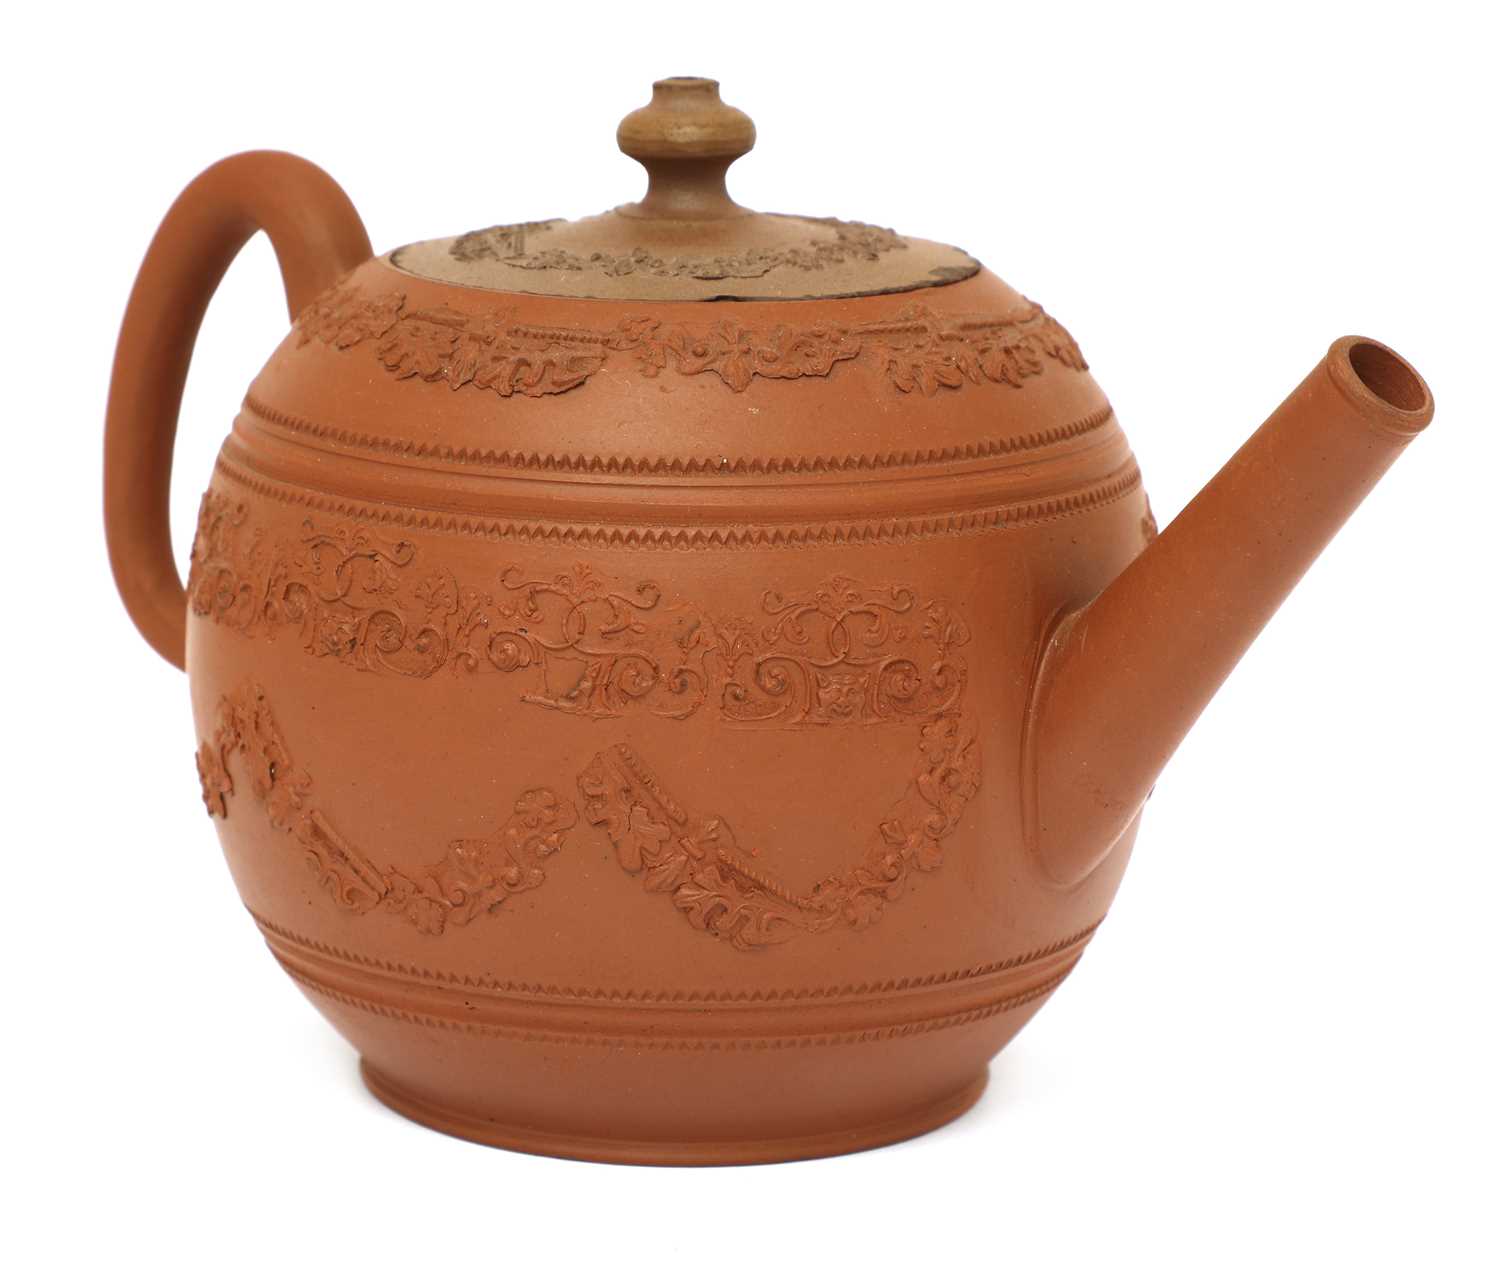 Lot 47 - A Staffordshire redware globular teapot and cover